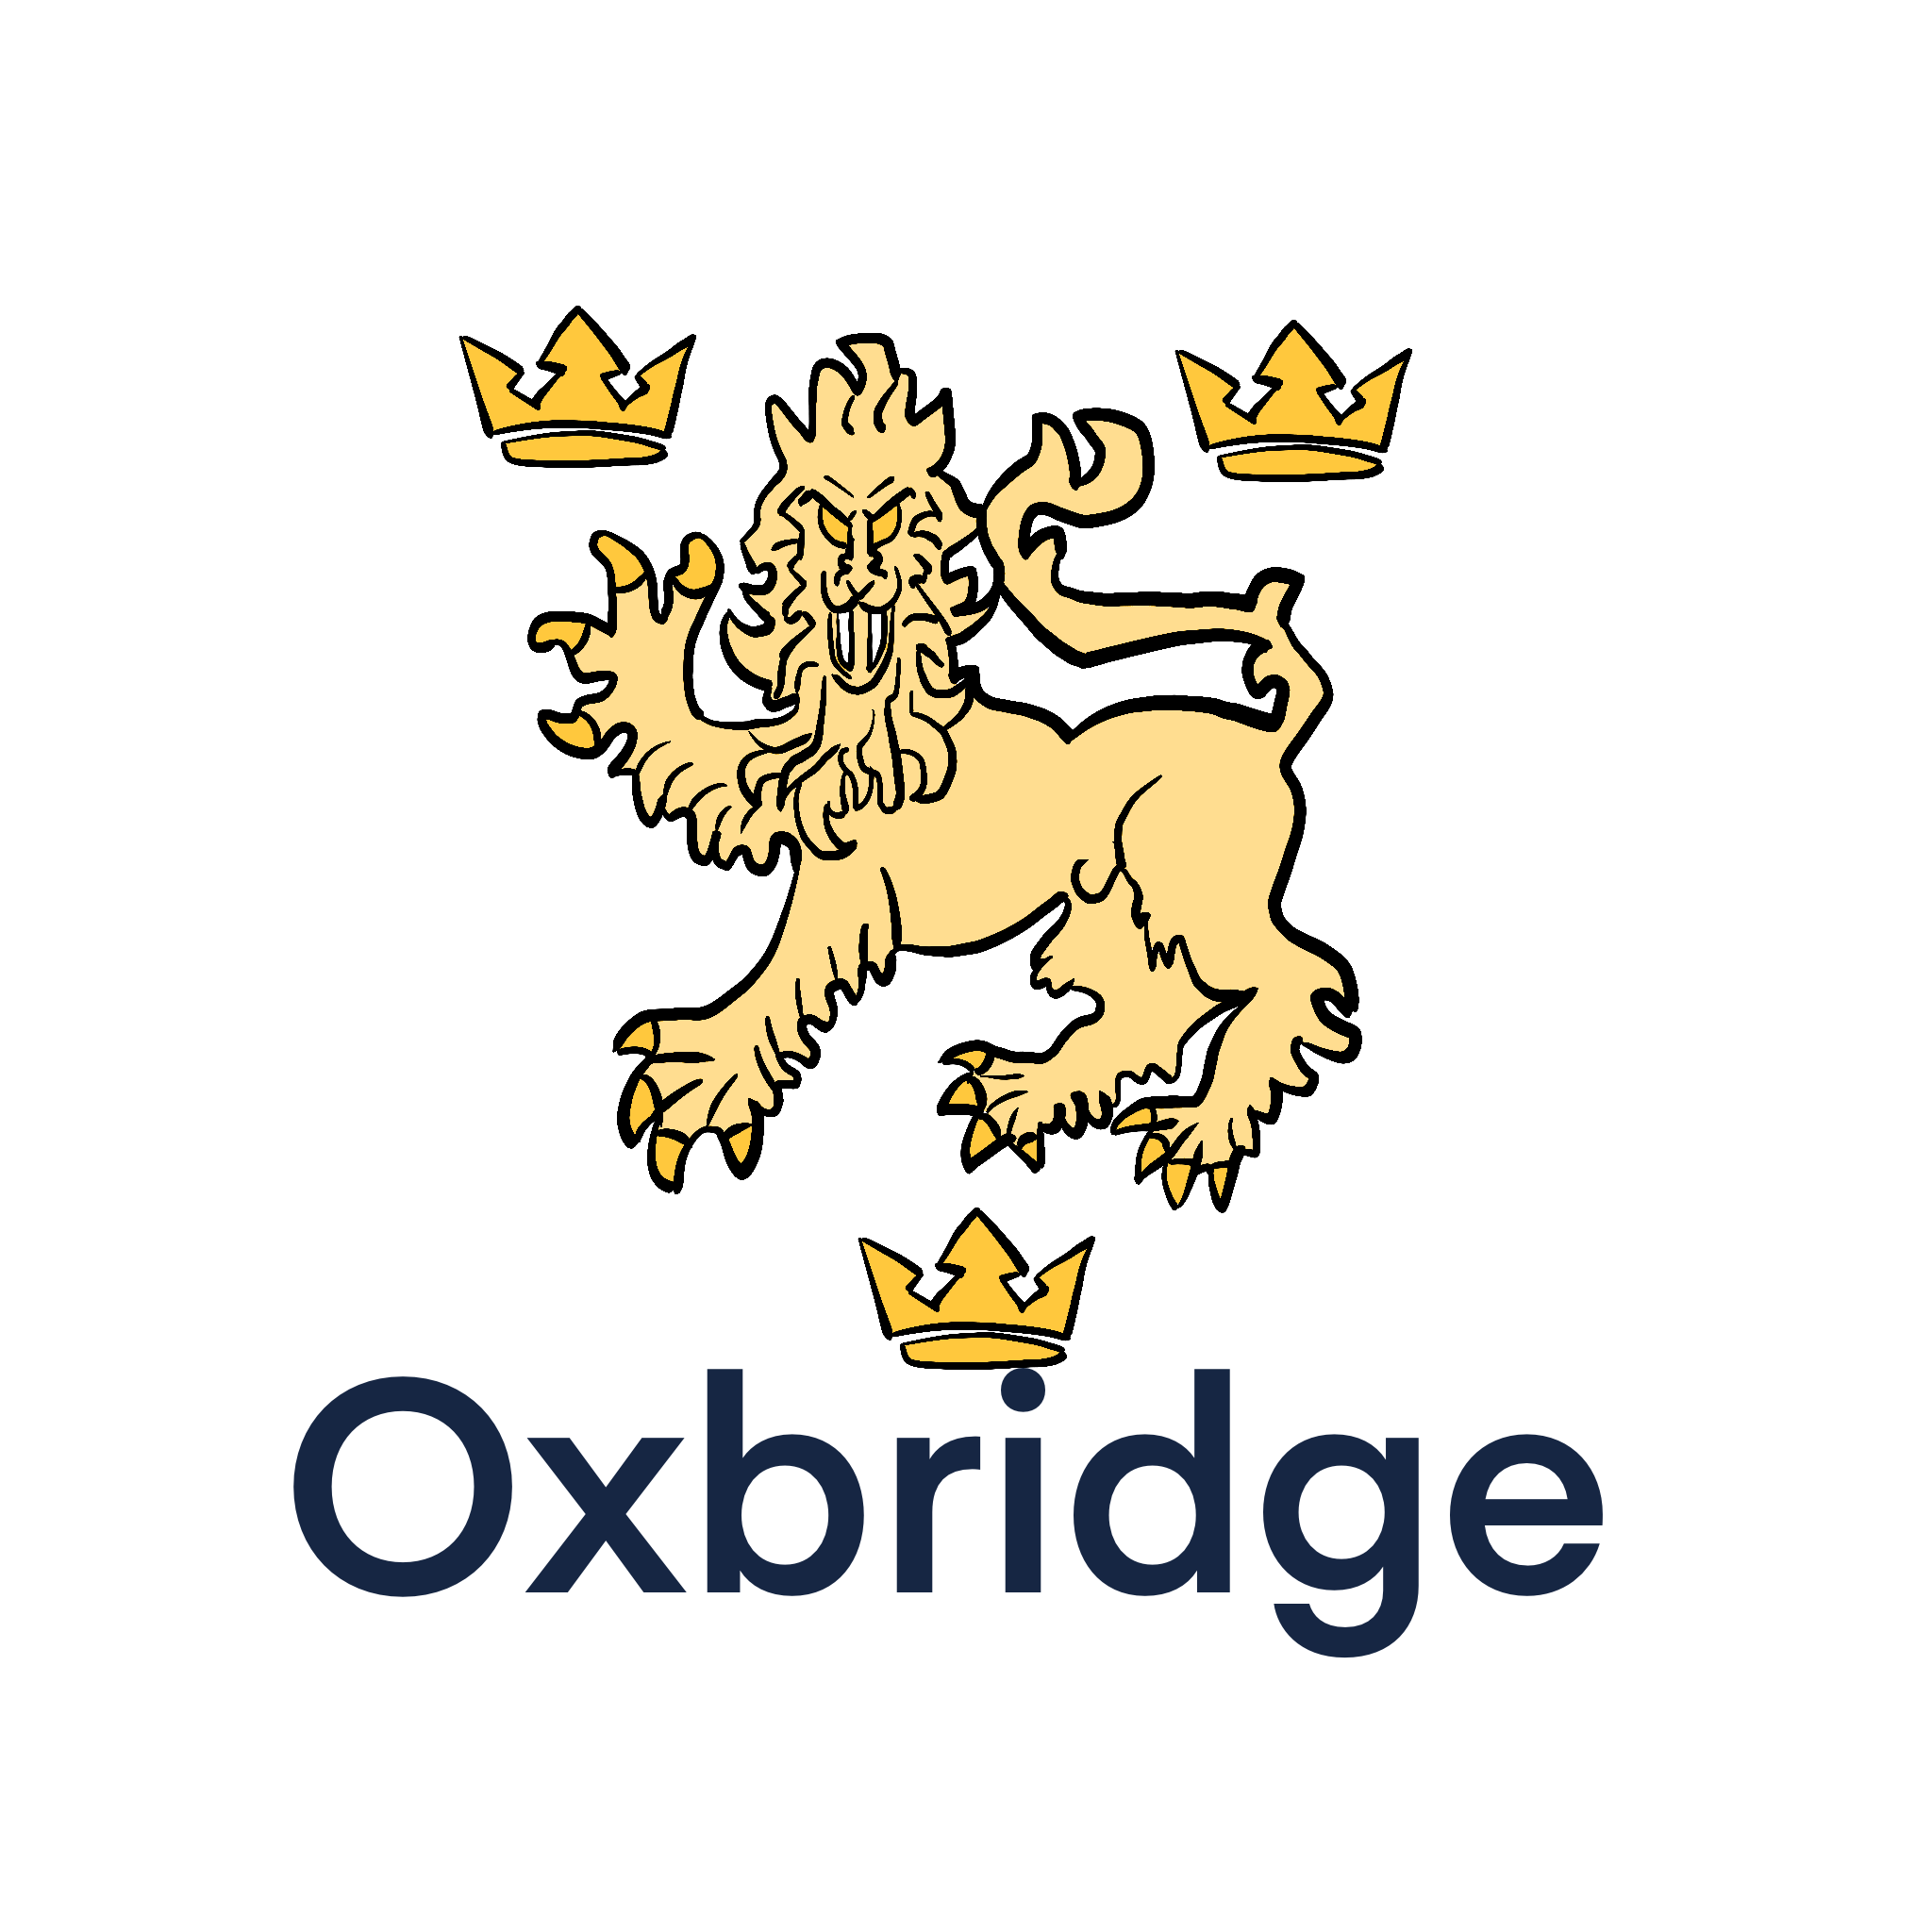 Conrad holds a degree from Oxbridge